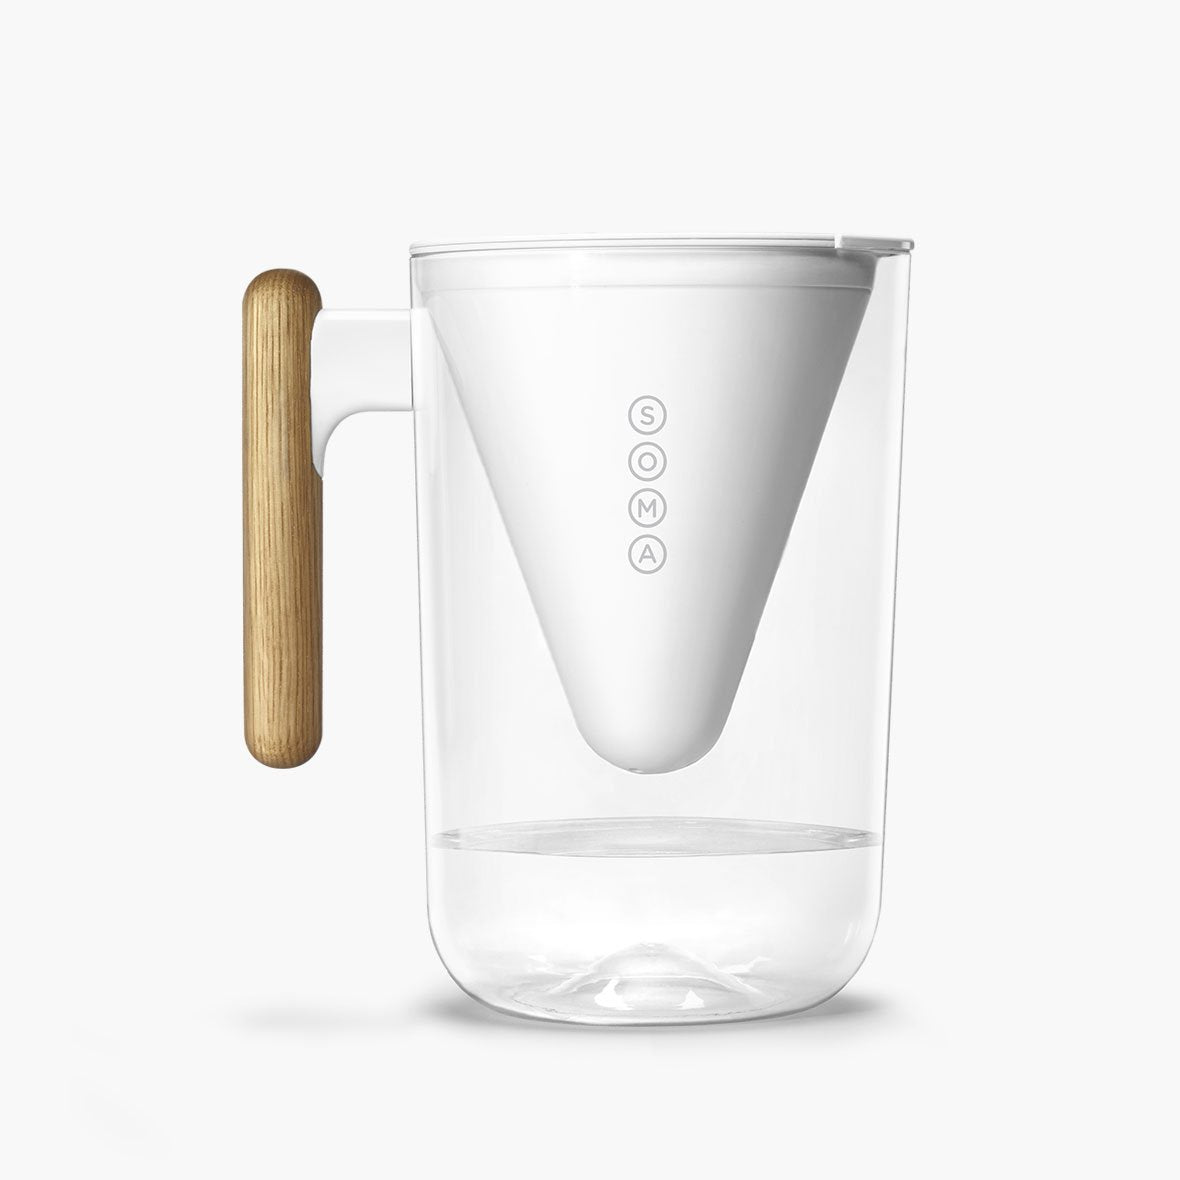 Soma Water Pitcher  Idea Central - CB2 Blog